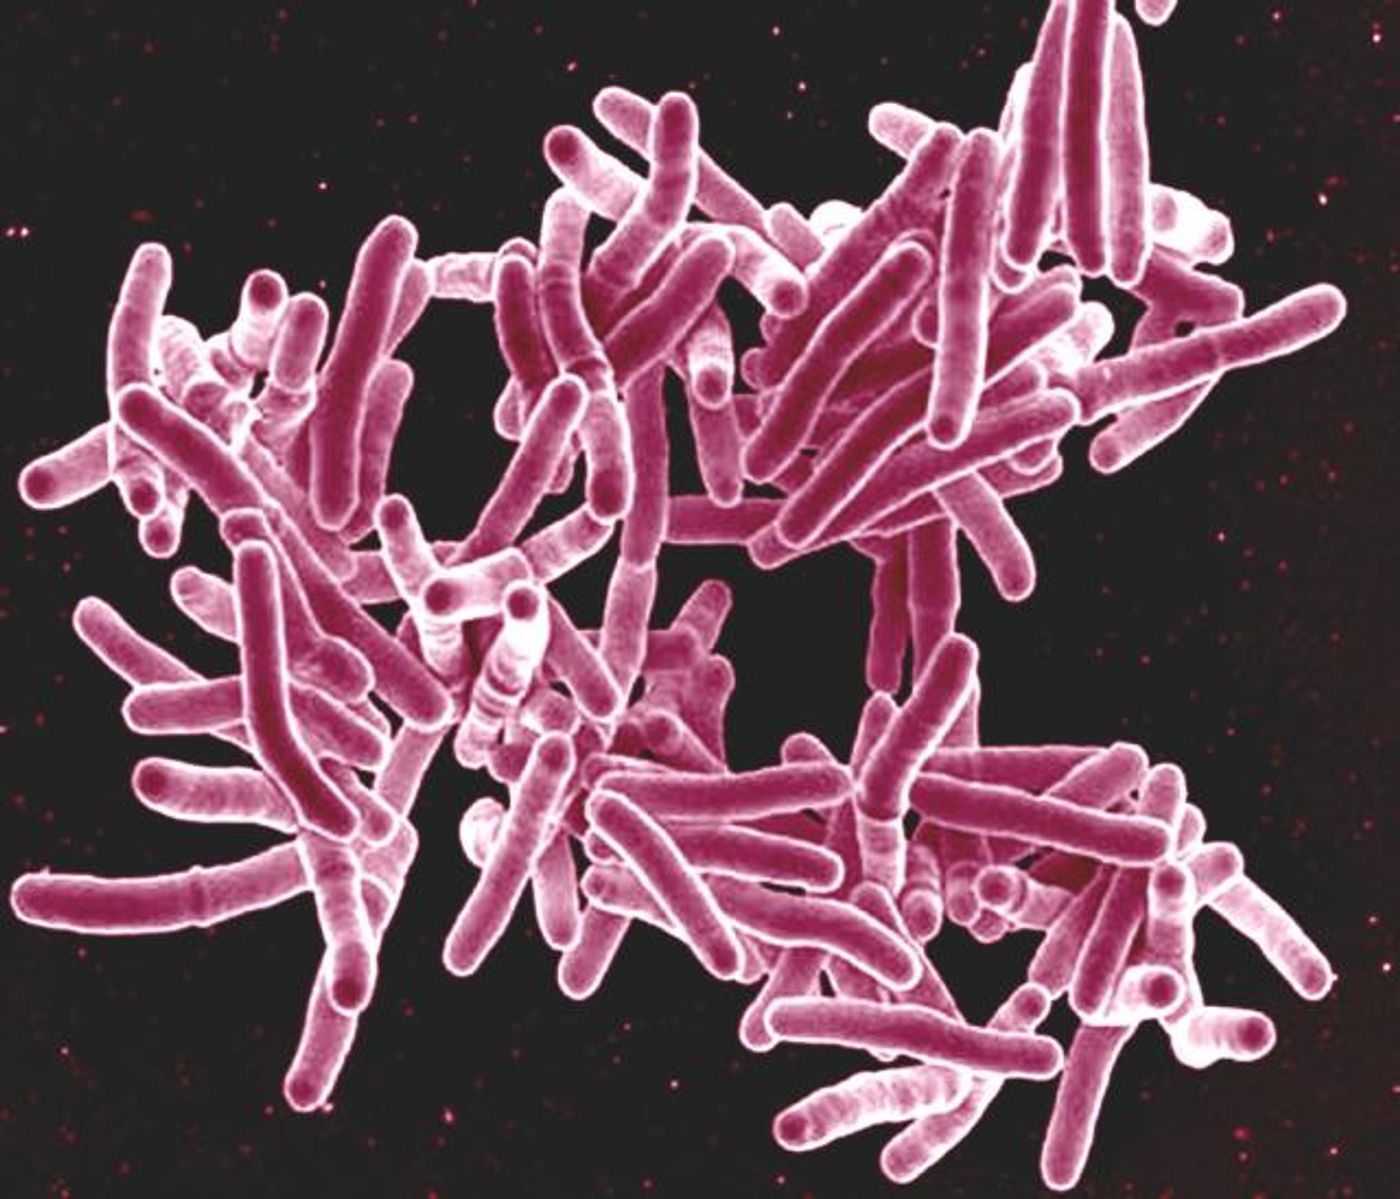 Mycobacterium tuberculosis Bacteria, the Cause of TB  Scanning electron micrograph of Mycobacterium tuberculosis bacteria, which cause TB. / Credit: NIAID